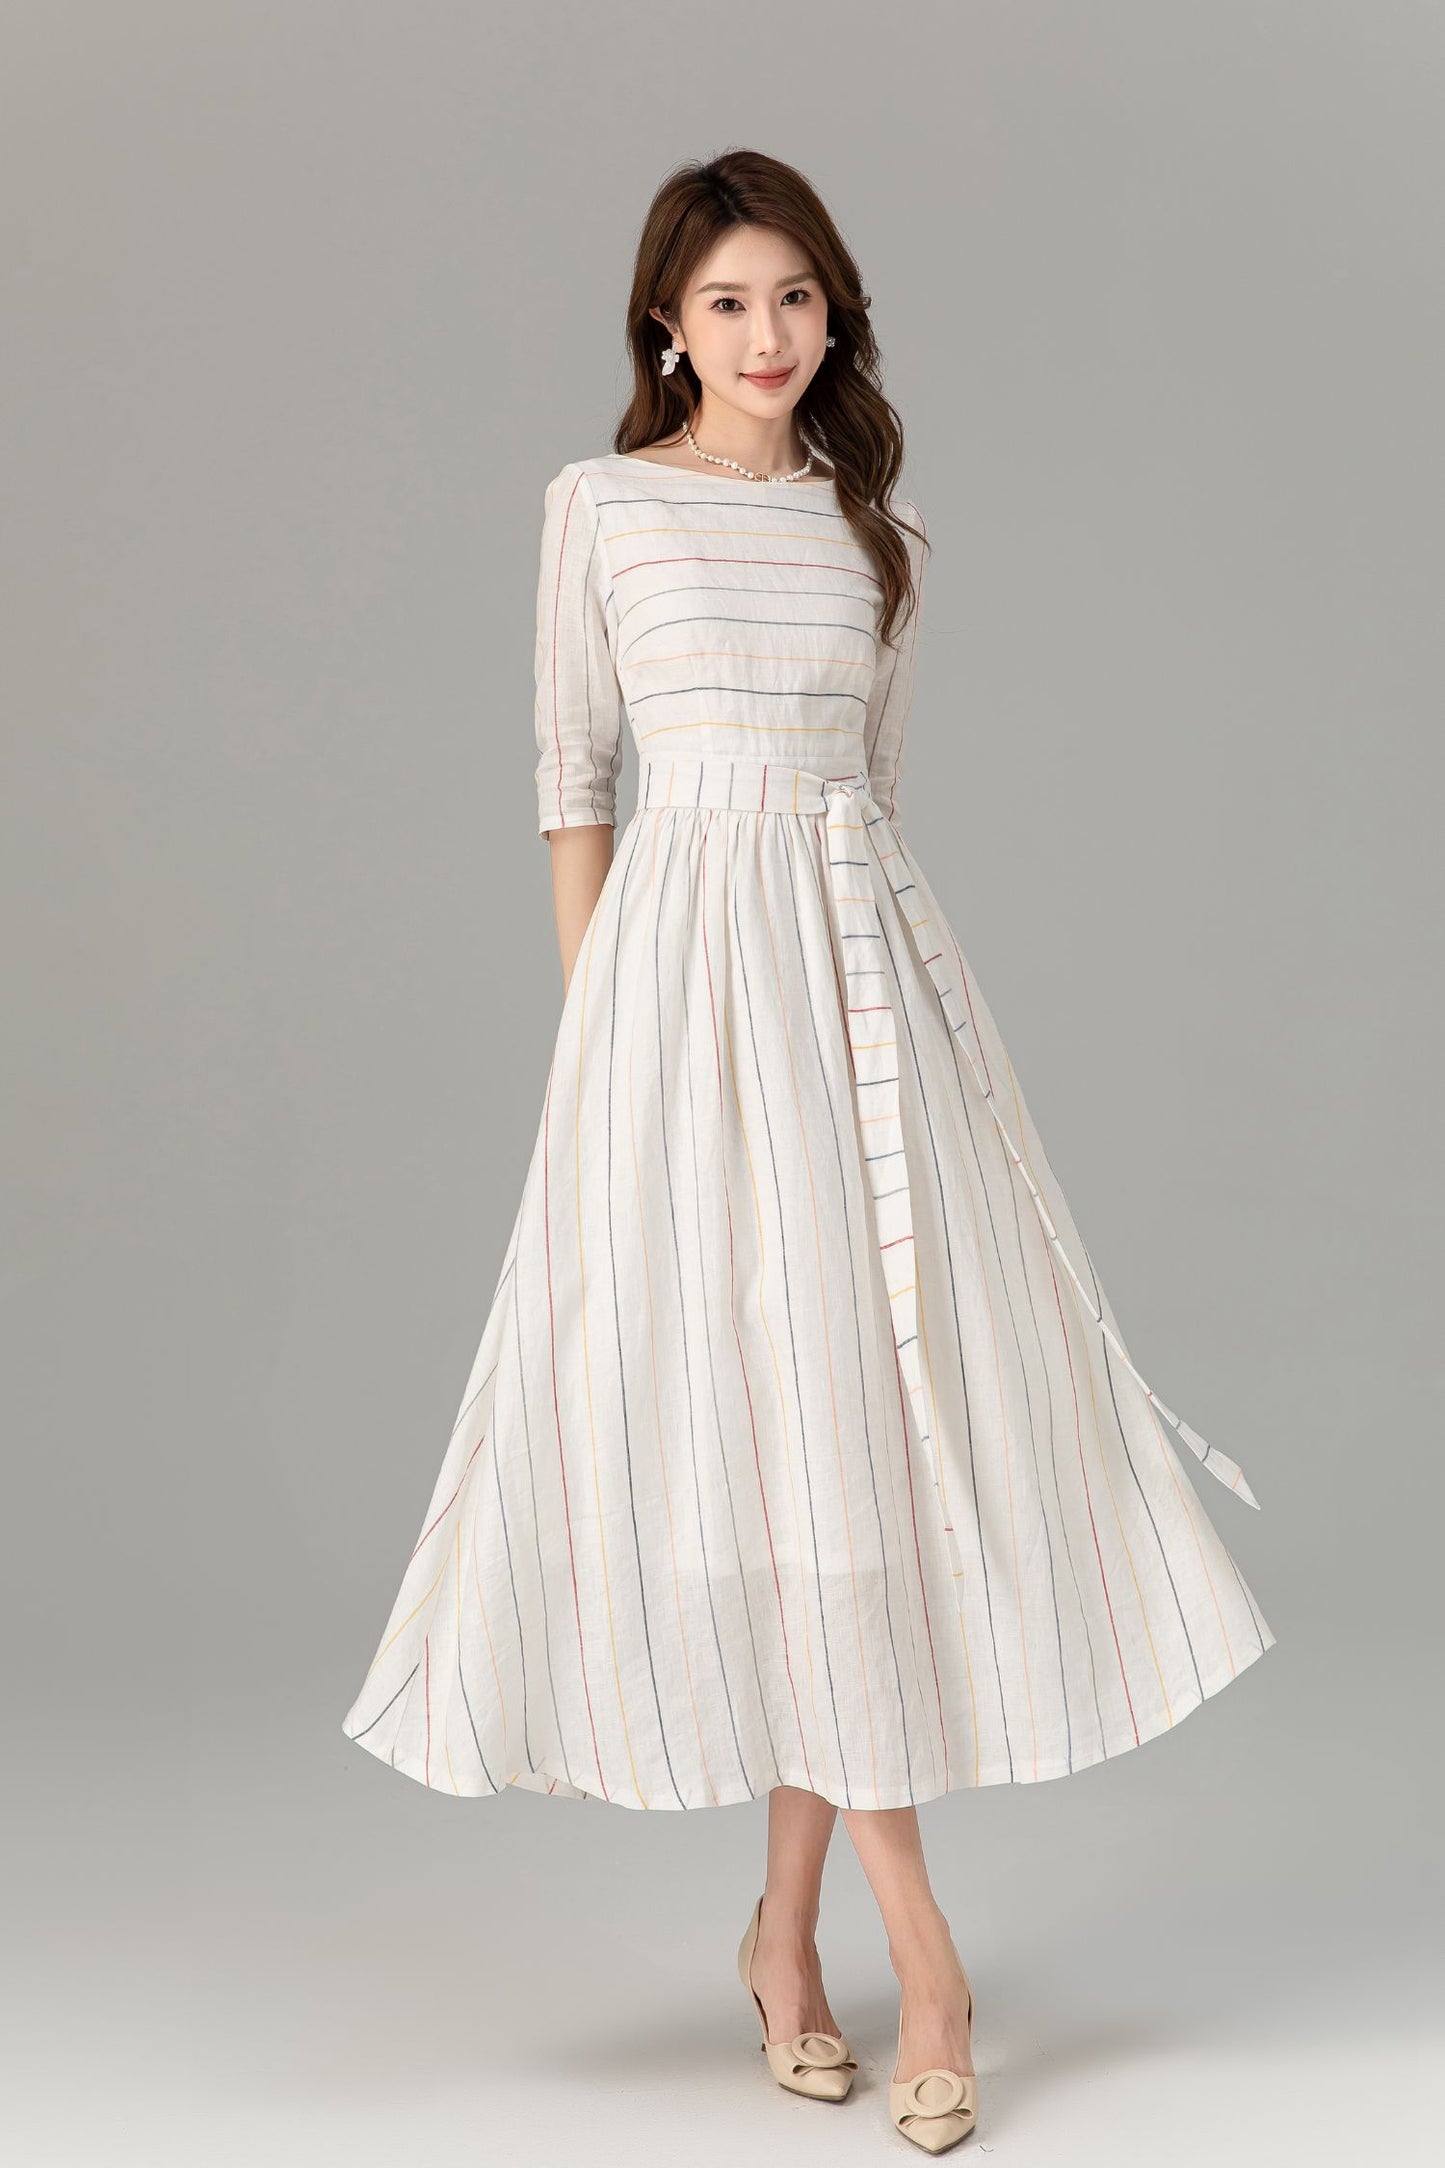 Tie belt white linen dress with colorful striple 4934